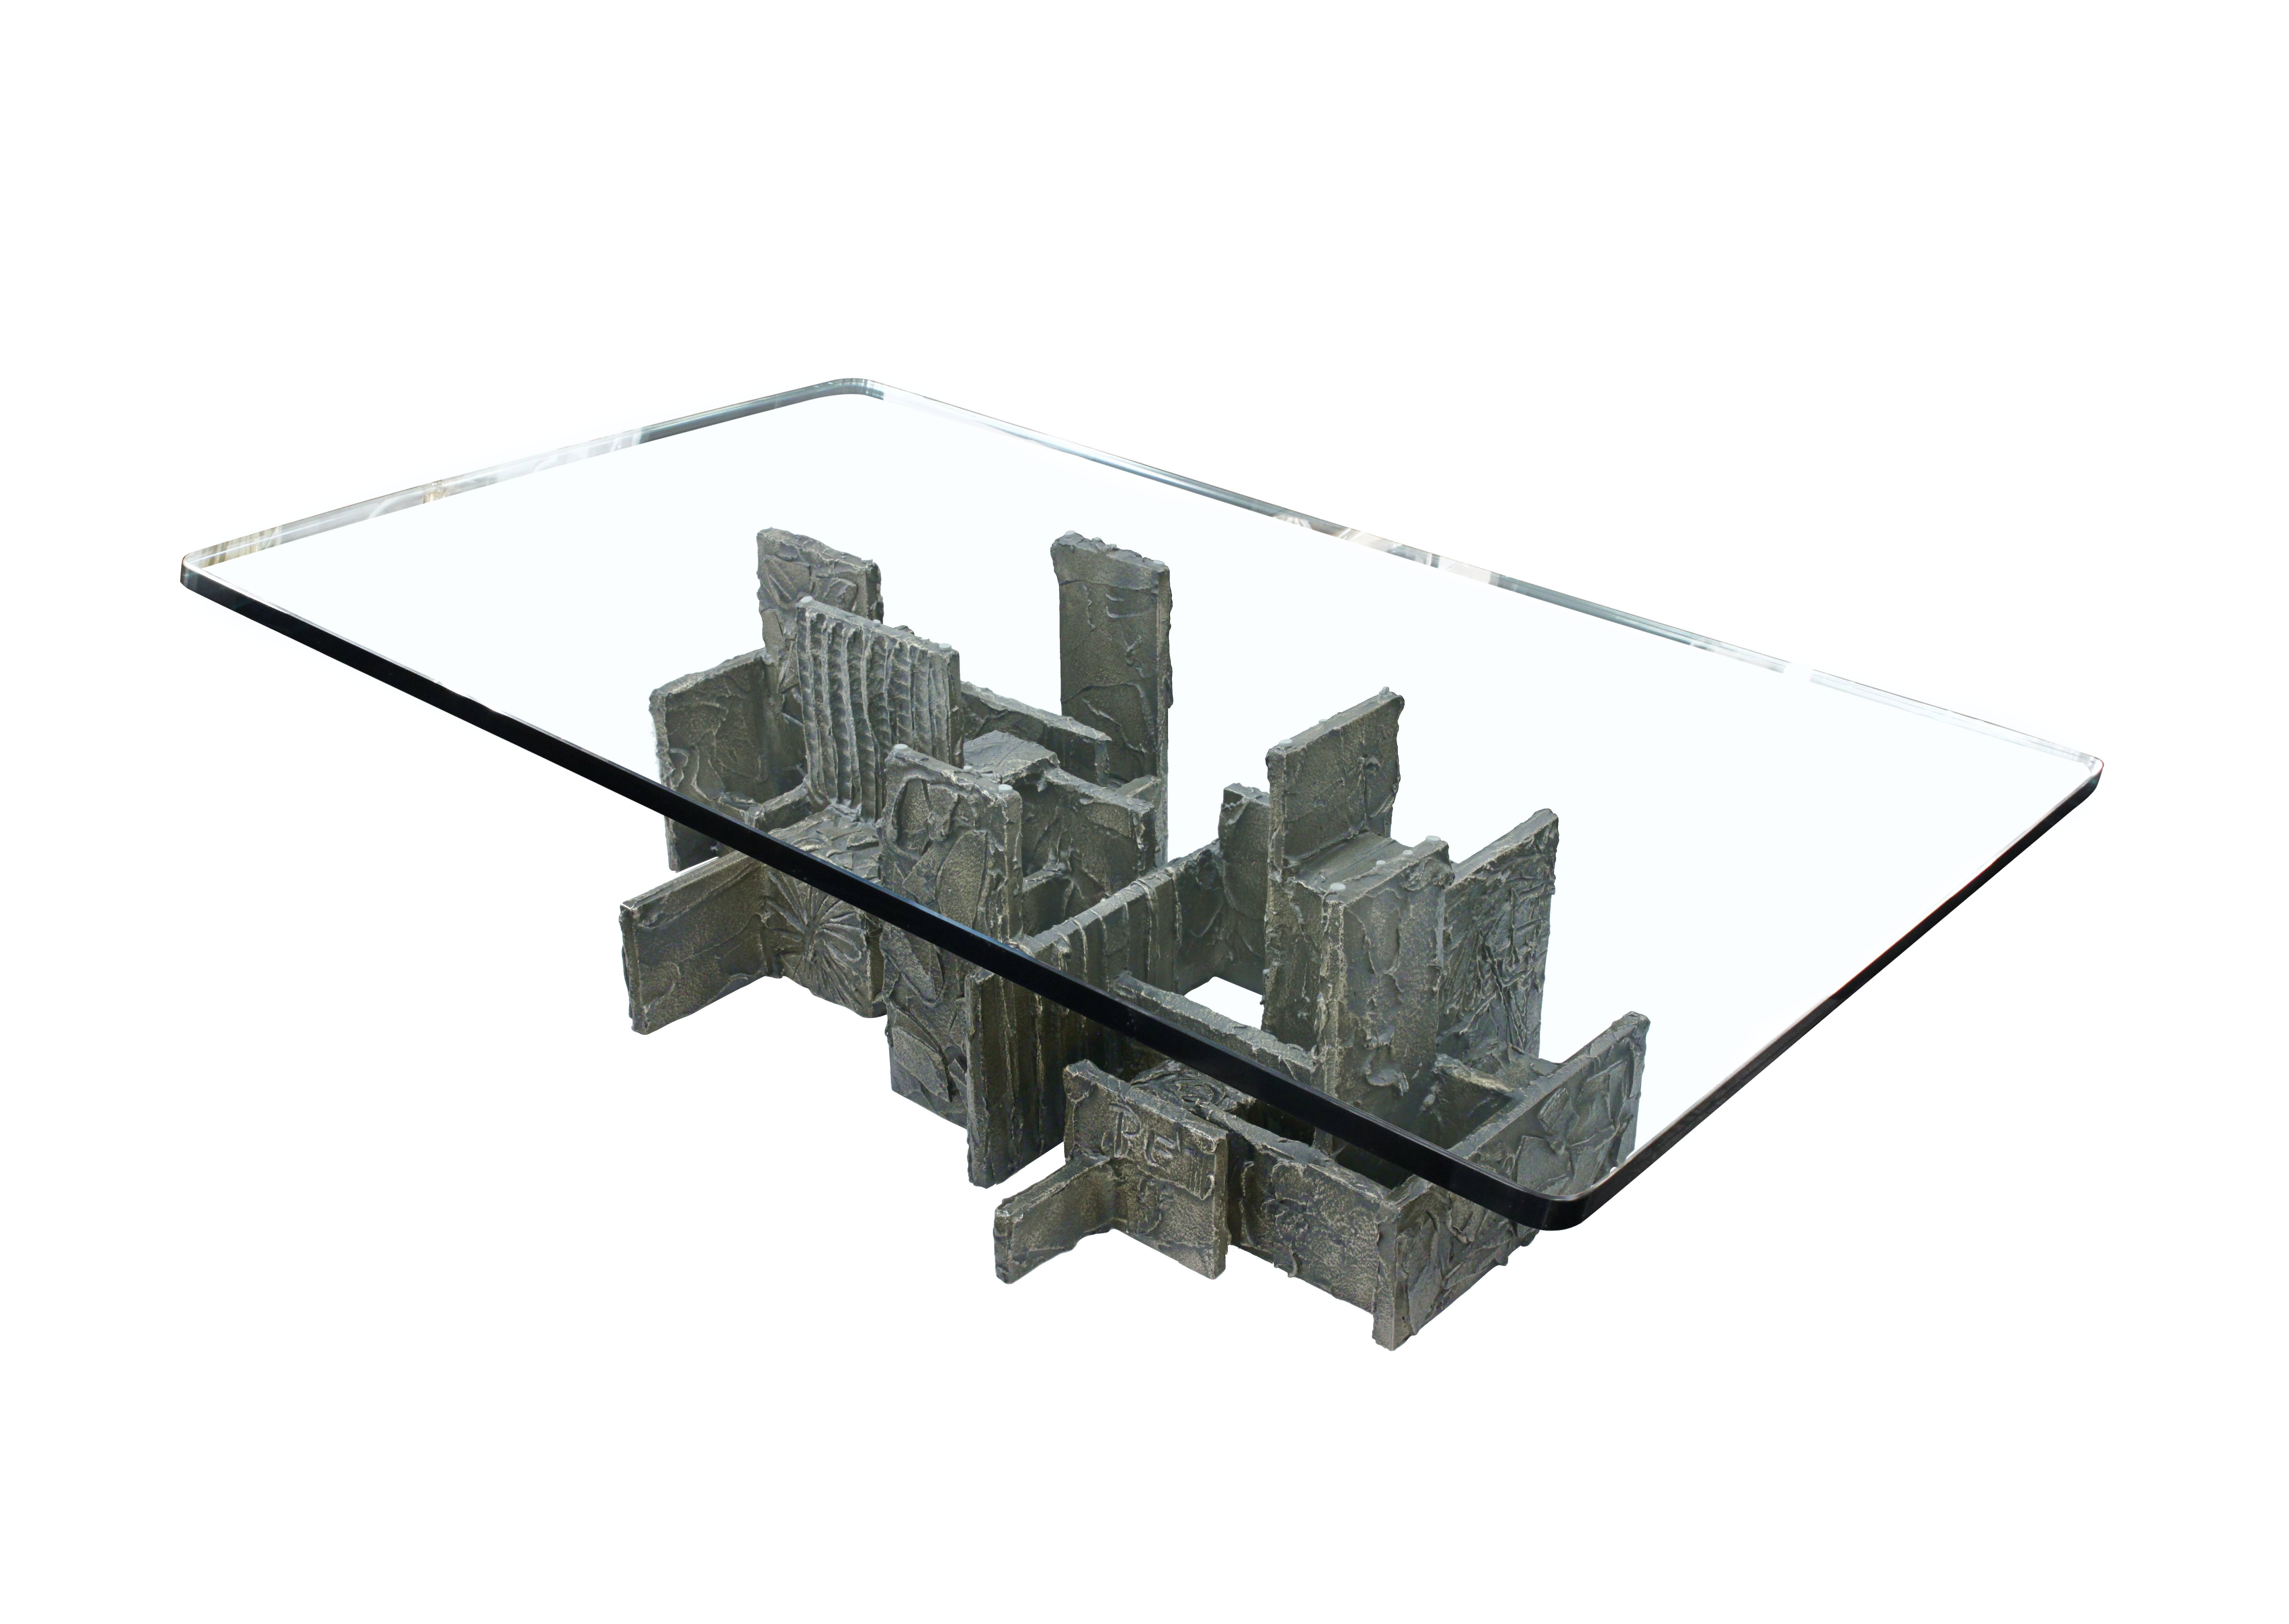 Coffee table with base in sculpted bronze resin with thick glass top by Paul Evans, American 1971 (initialed 